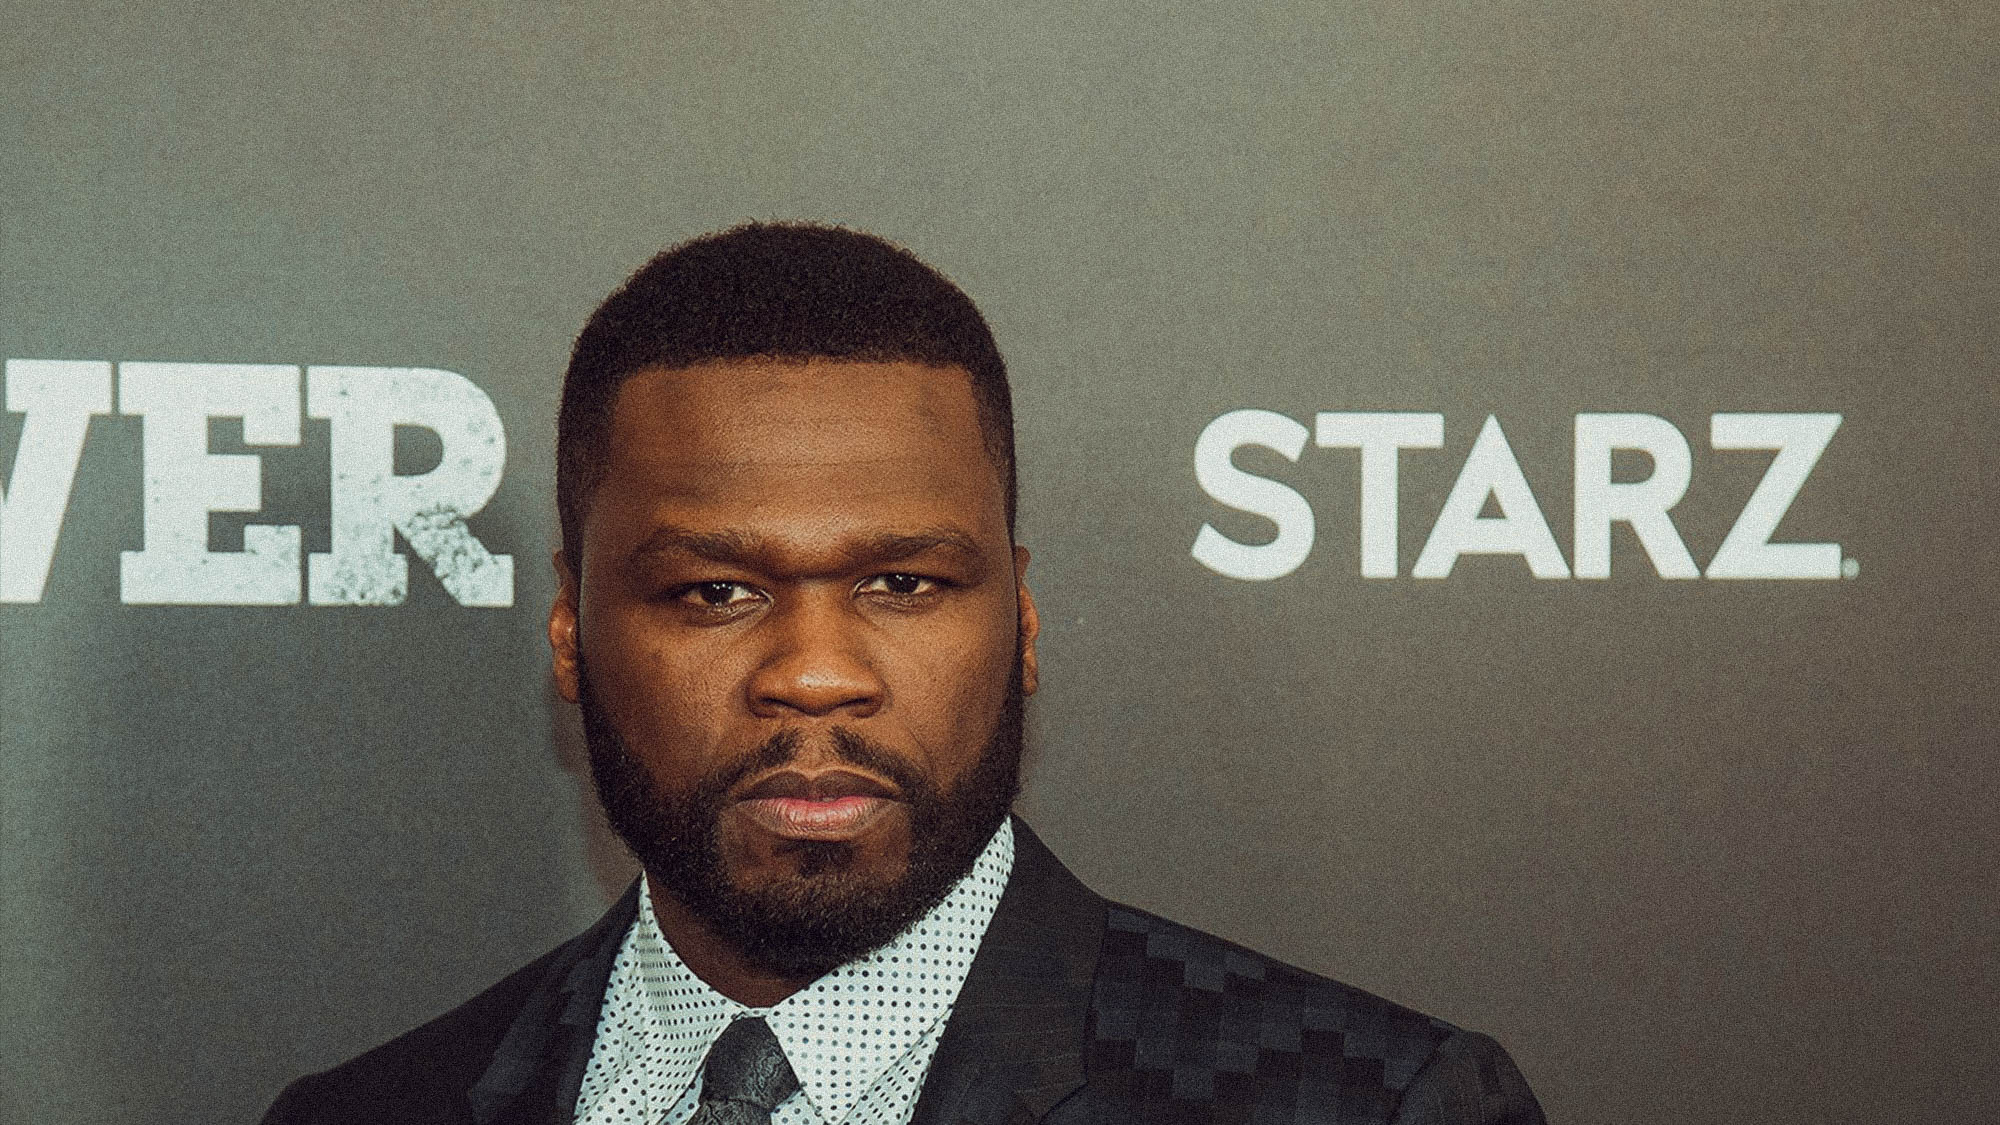 50 Cent Slams STARZ And Announces His Exit From The Network